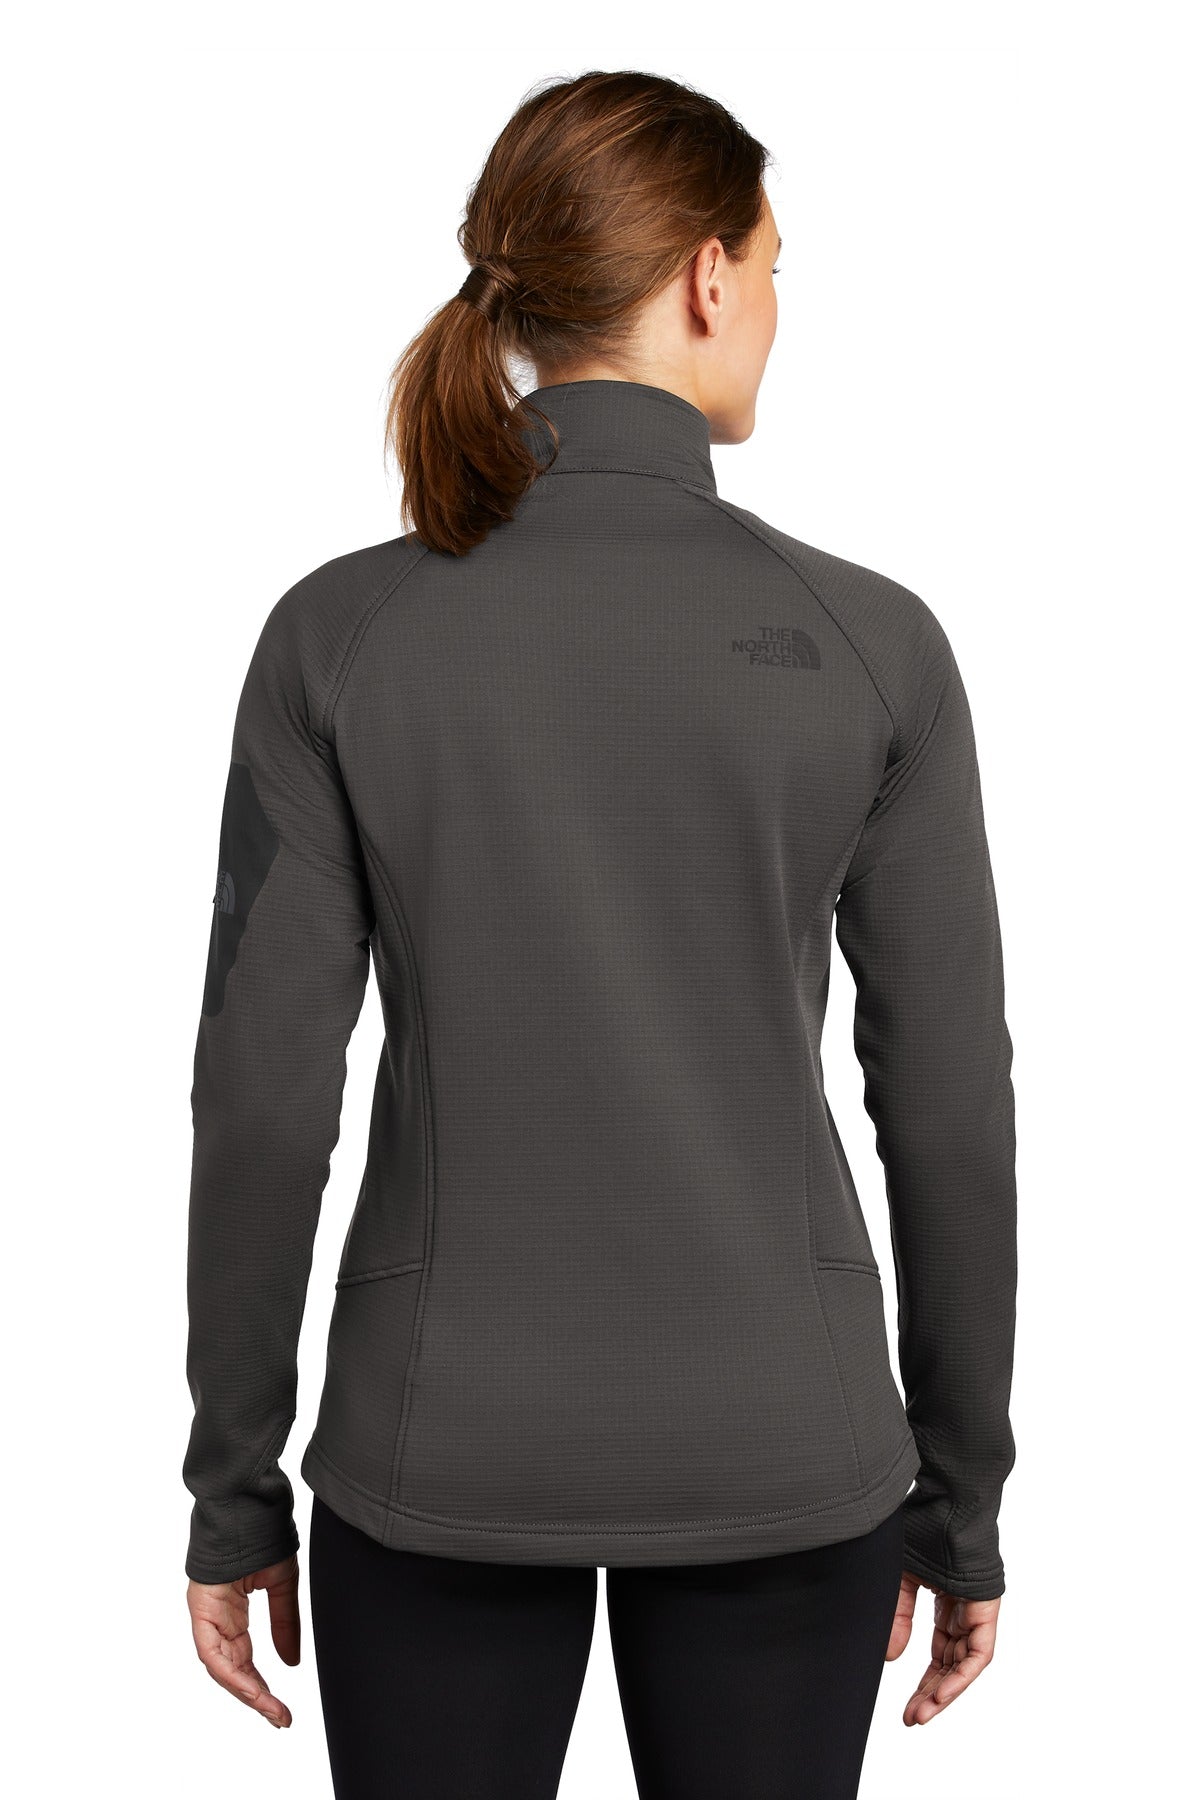 The North Face ® Ladies Mountain Peaks Full-Zip Fleece Jacket NF0A47FE - DFW Impression